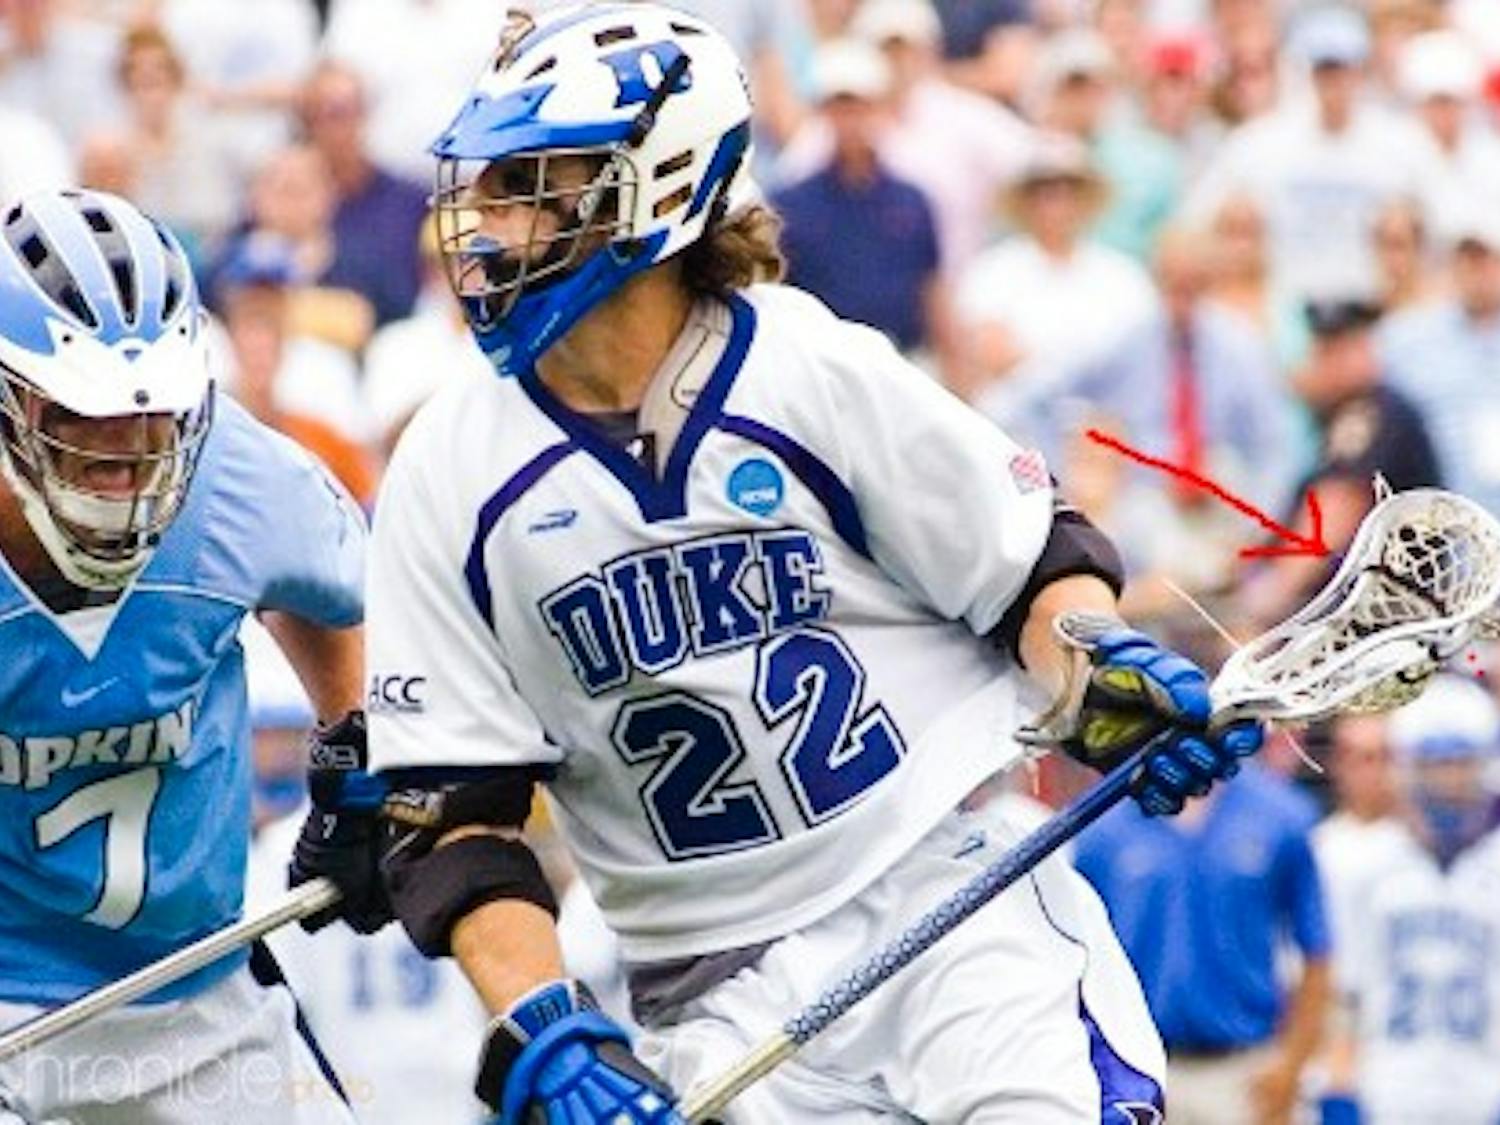 Ned Crotty led Duke to the 2010 national championship as the Tewaaraton Award winner his senior year and is now back on the sidelines in Durham.